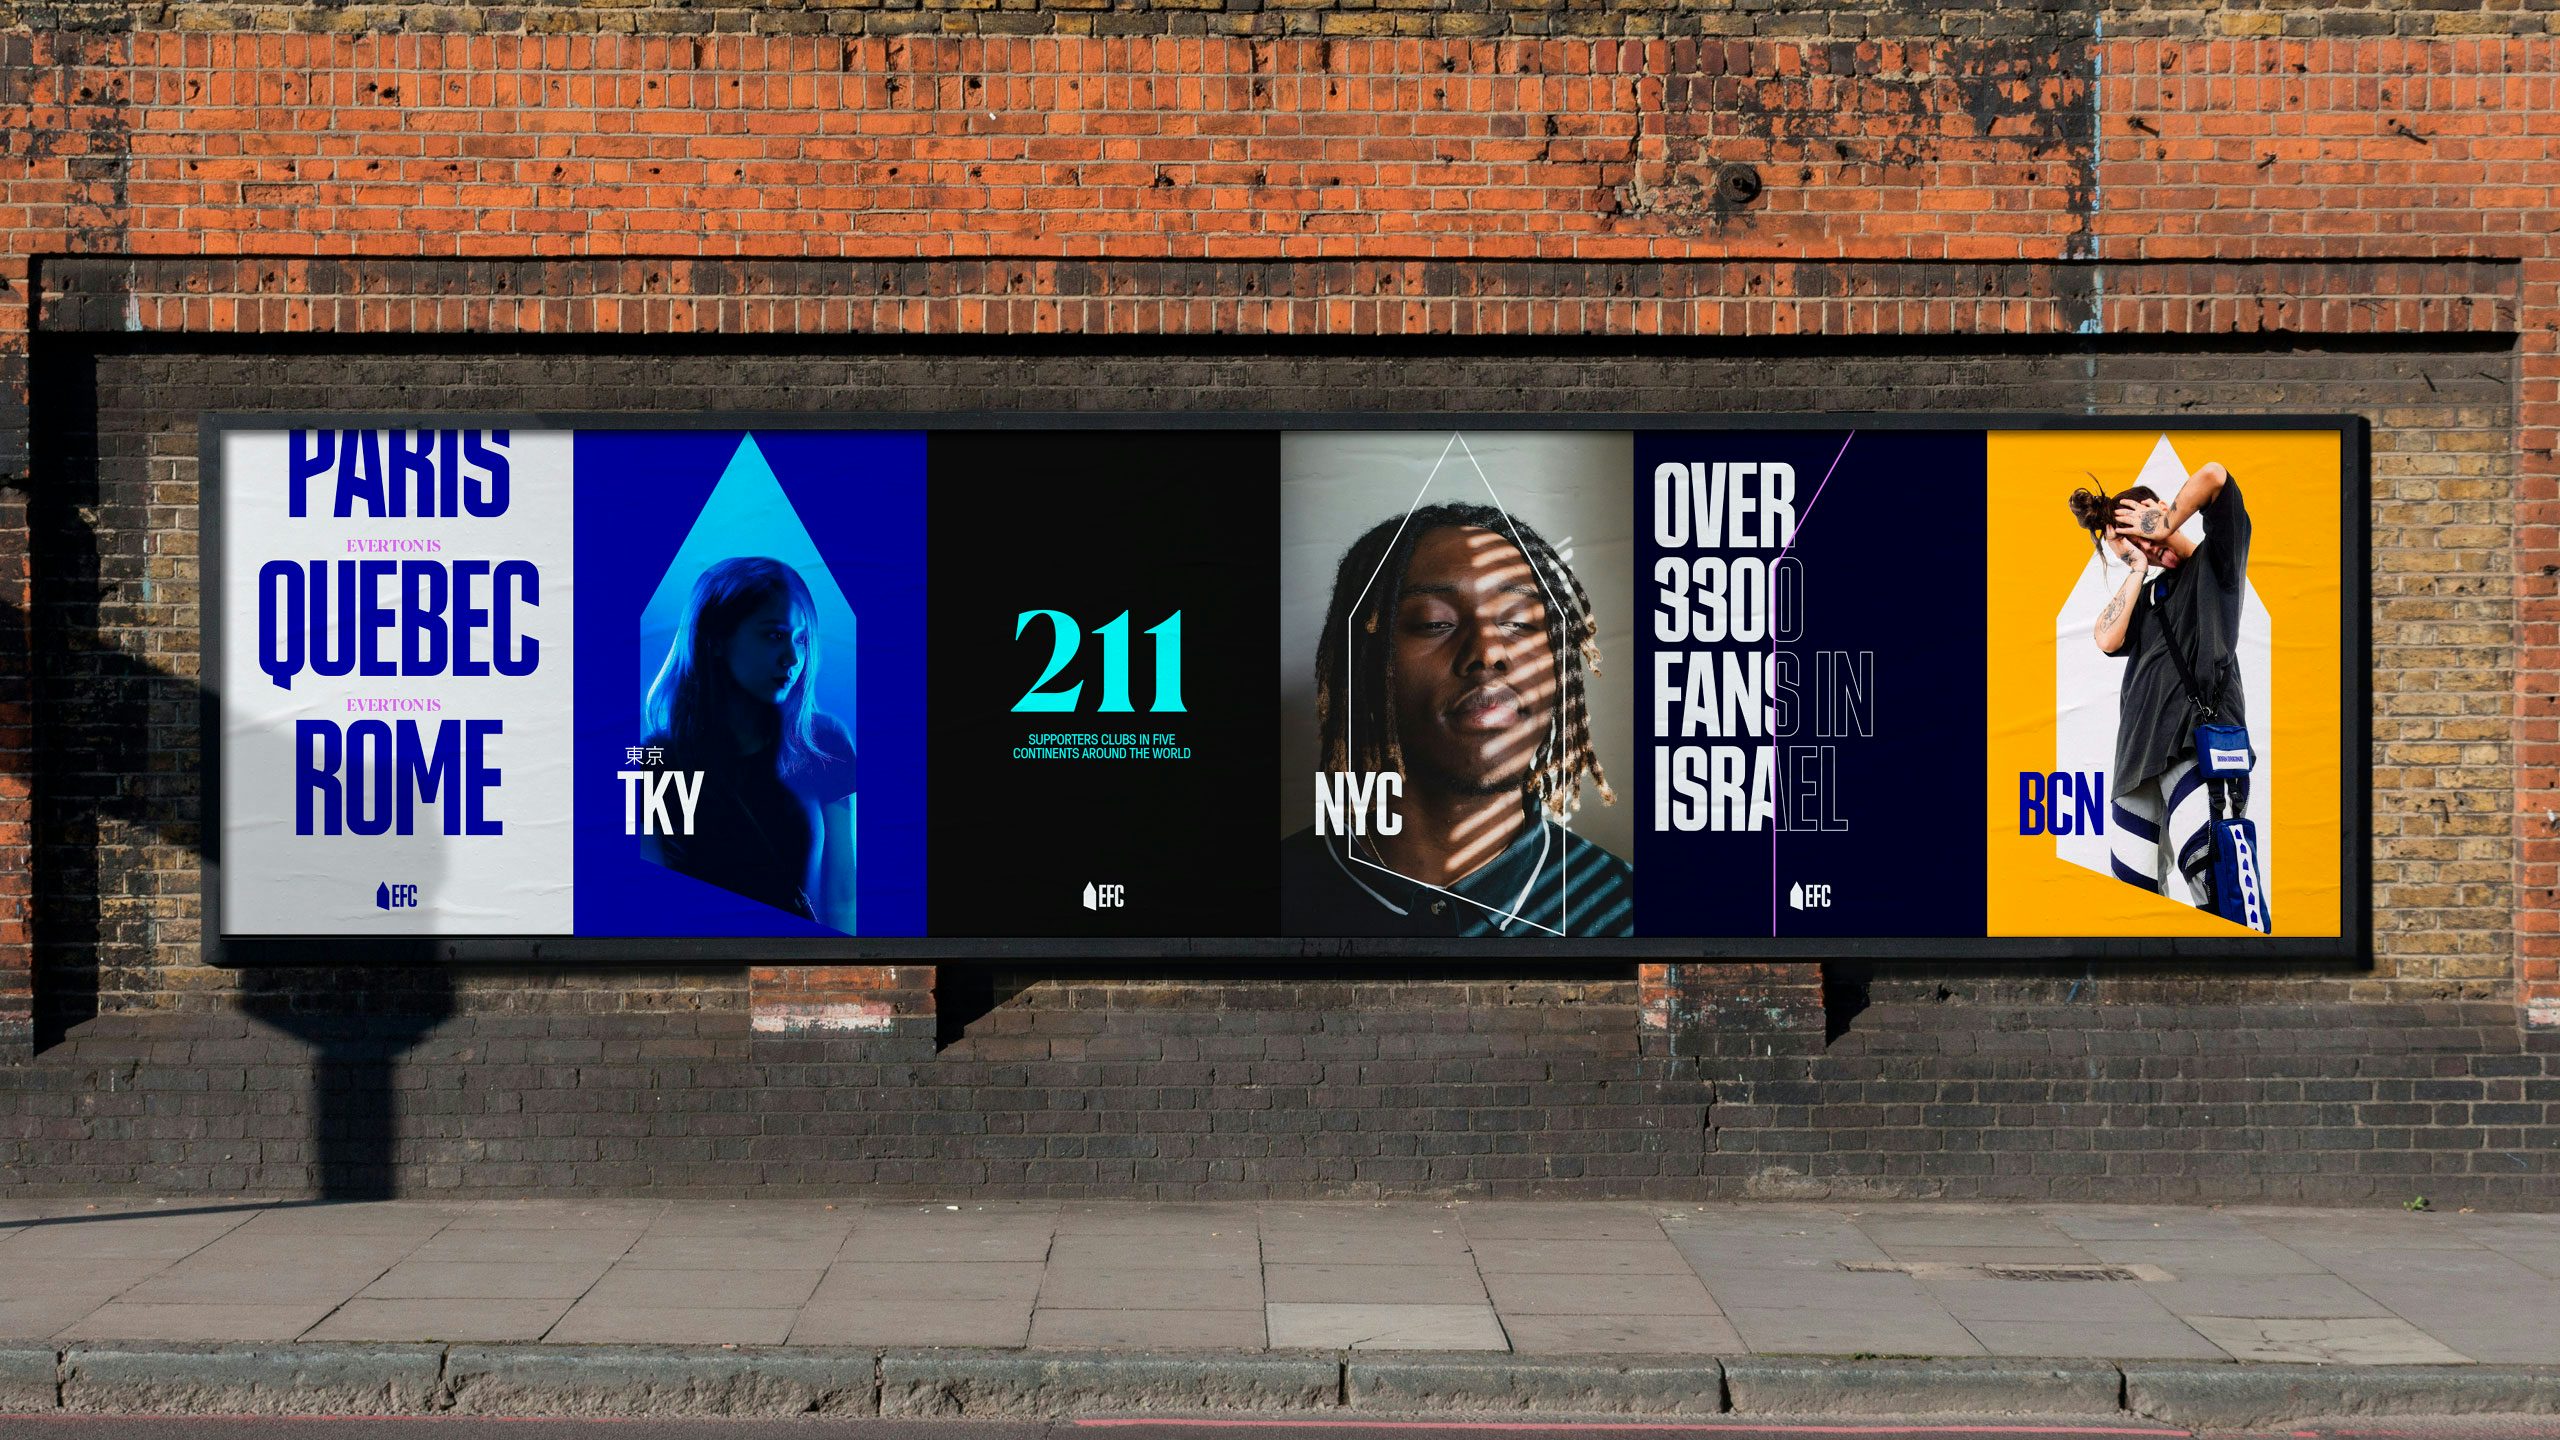 Photograph of a wall of Everton advertising